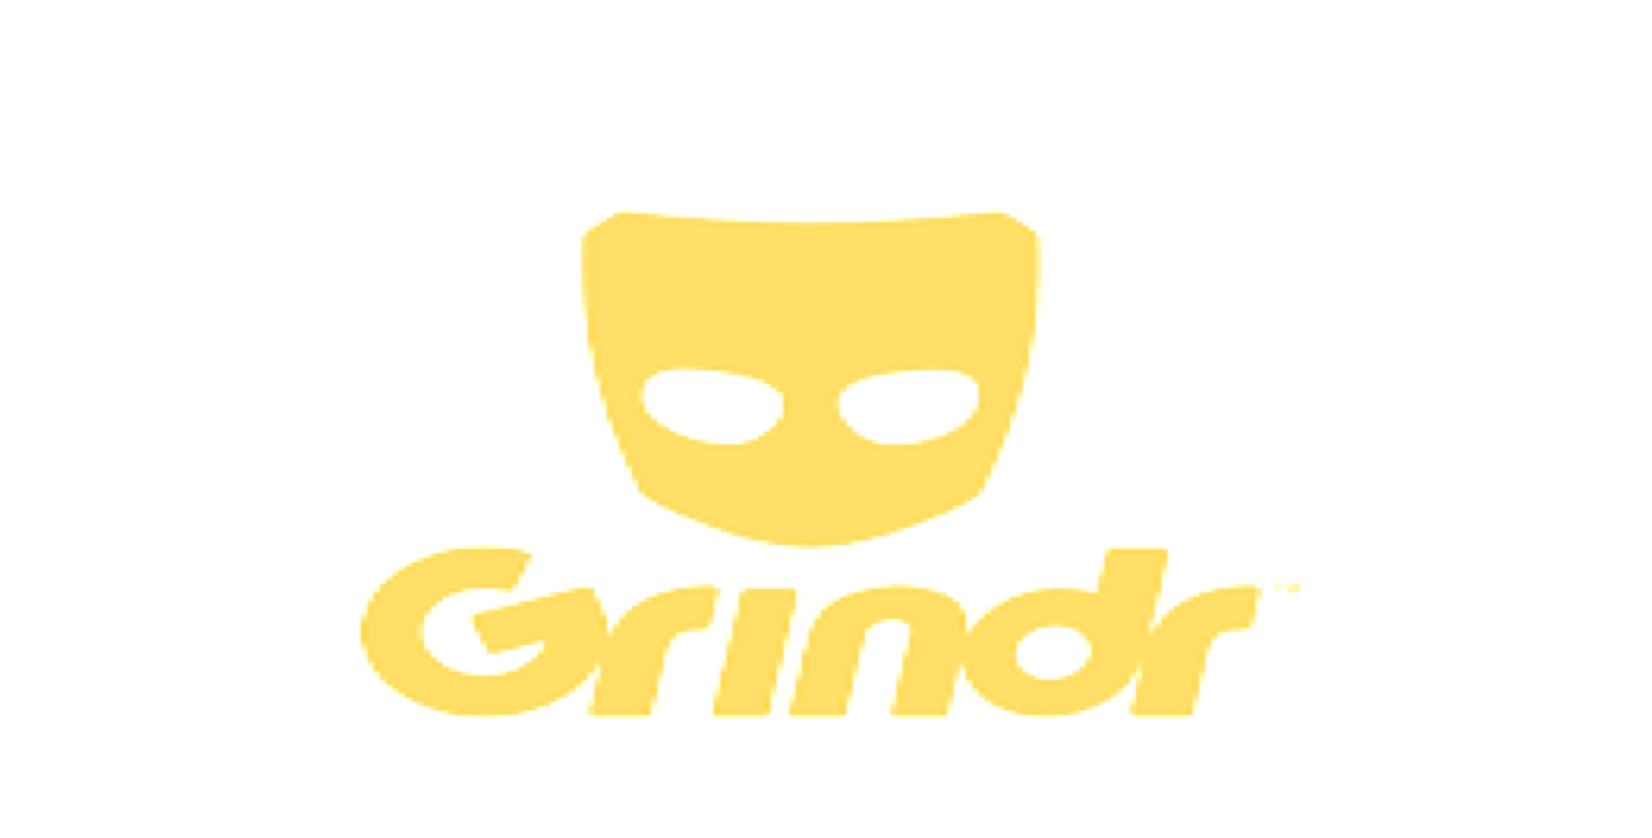 Xtra iphone grindr get free All Must